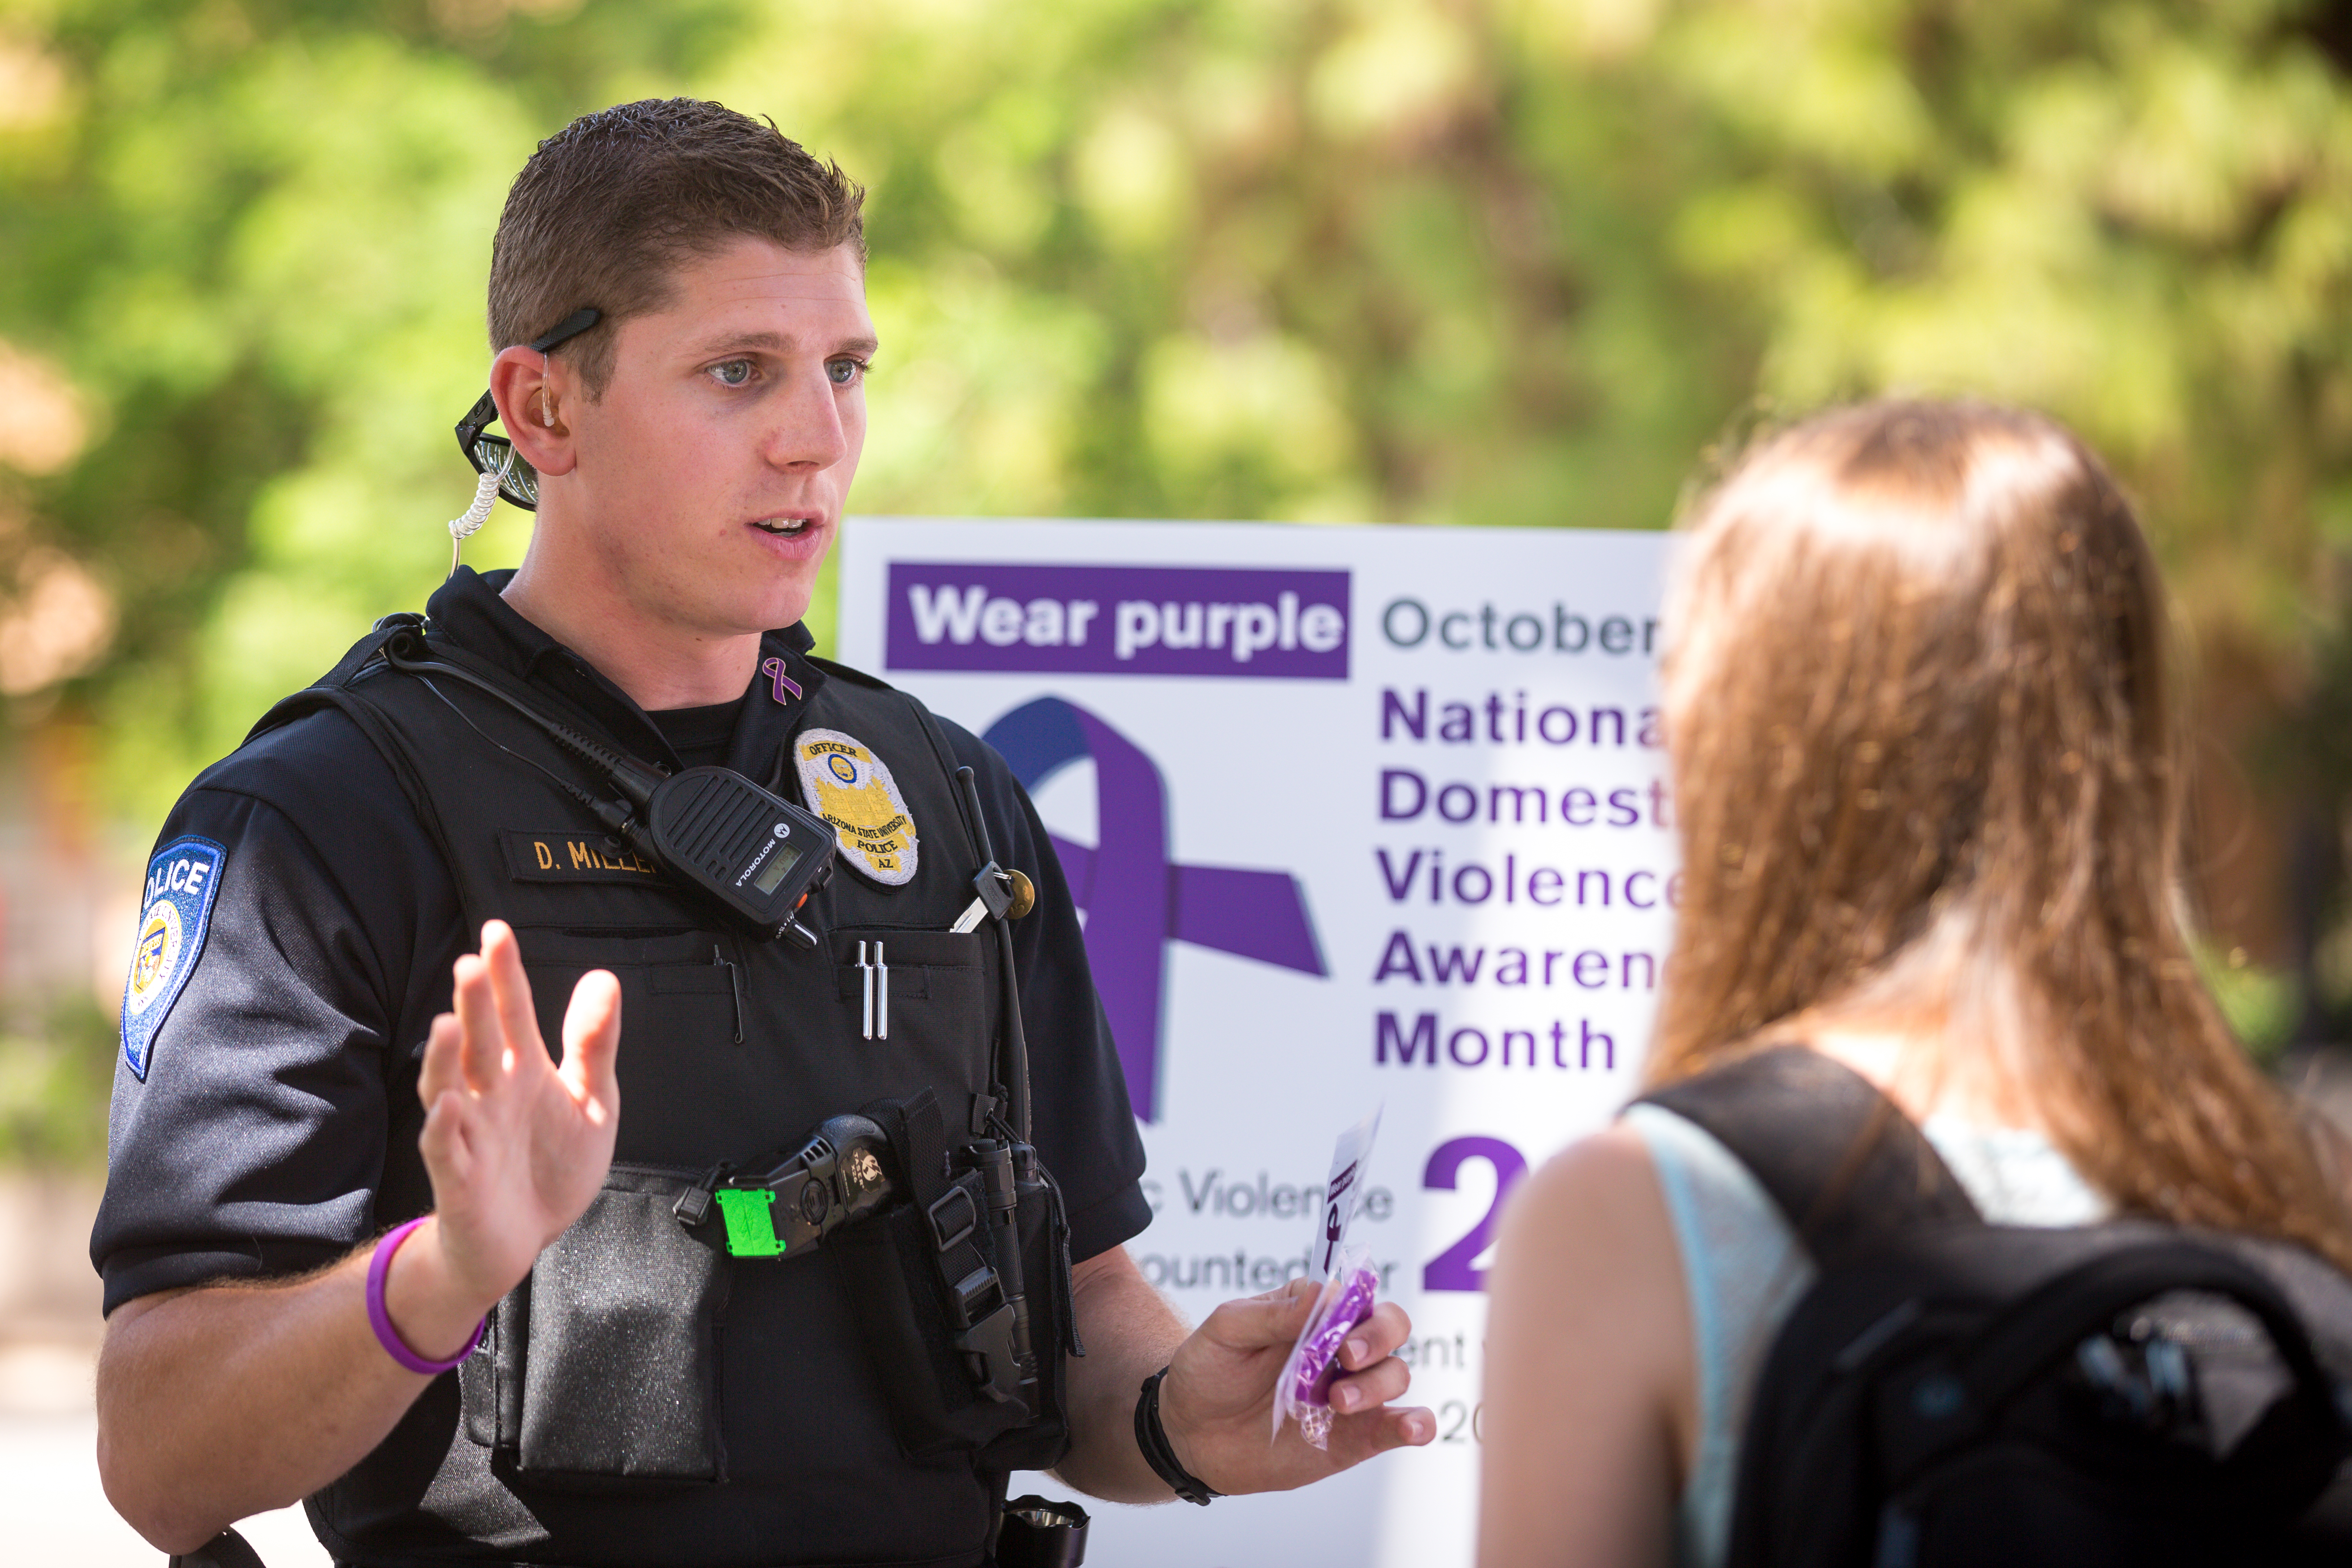 Photo of ASU Police Officer Daniel Miller and student during Domestic Violence Awareness Month